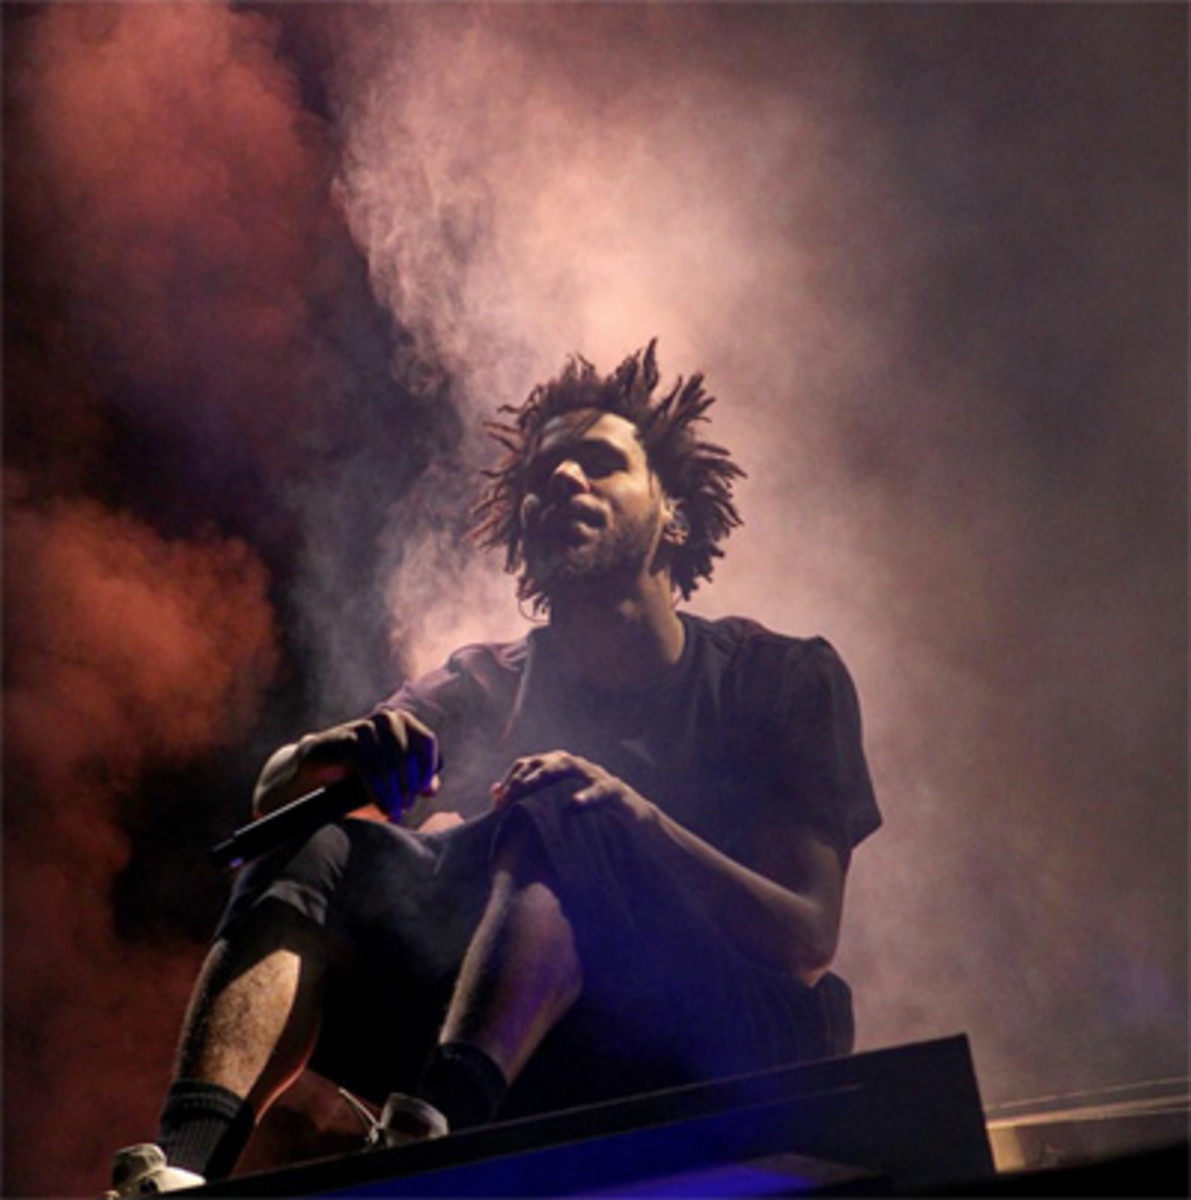 J. Cole Sells Out Madison Square Garden, Undeniably Enters Superstardom - DJBooth1191 x 1200